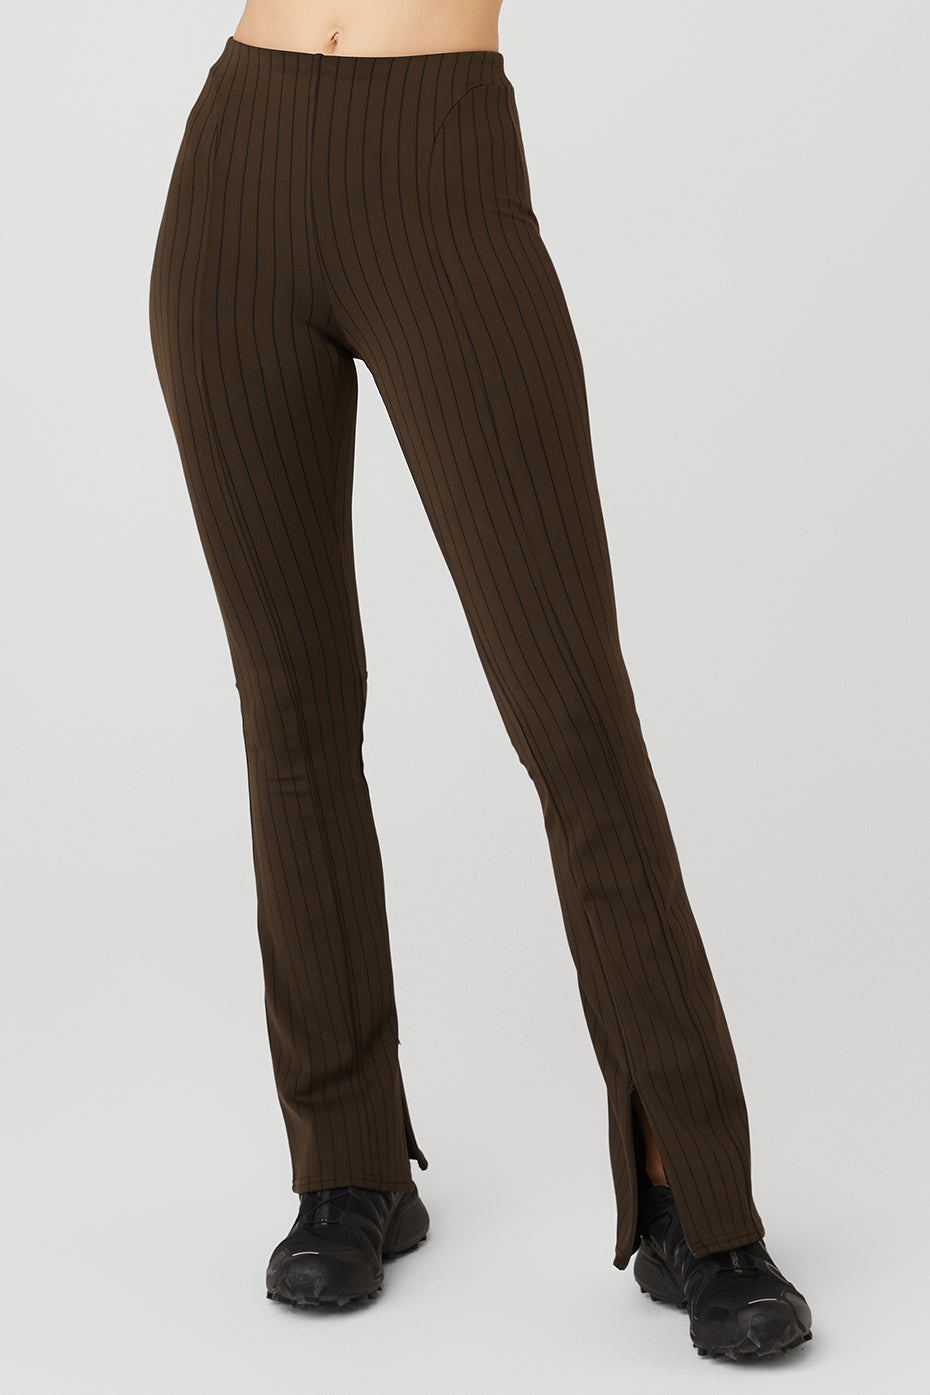 Buy Alo Brown Airbrush 7/8 Flutter Leggings - Espresso At 51% Off